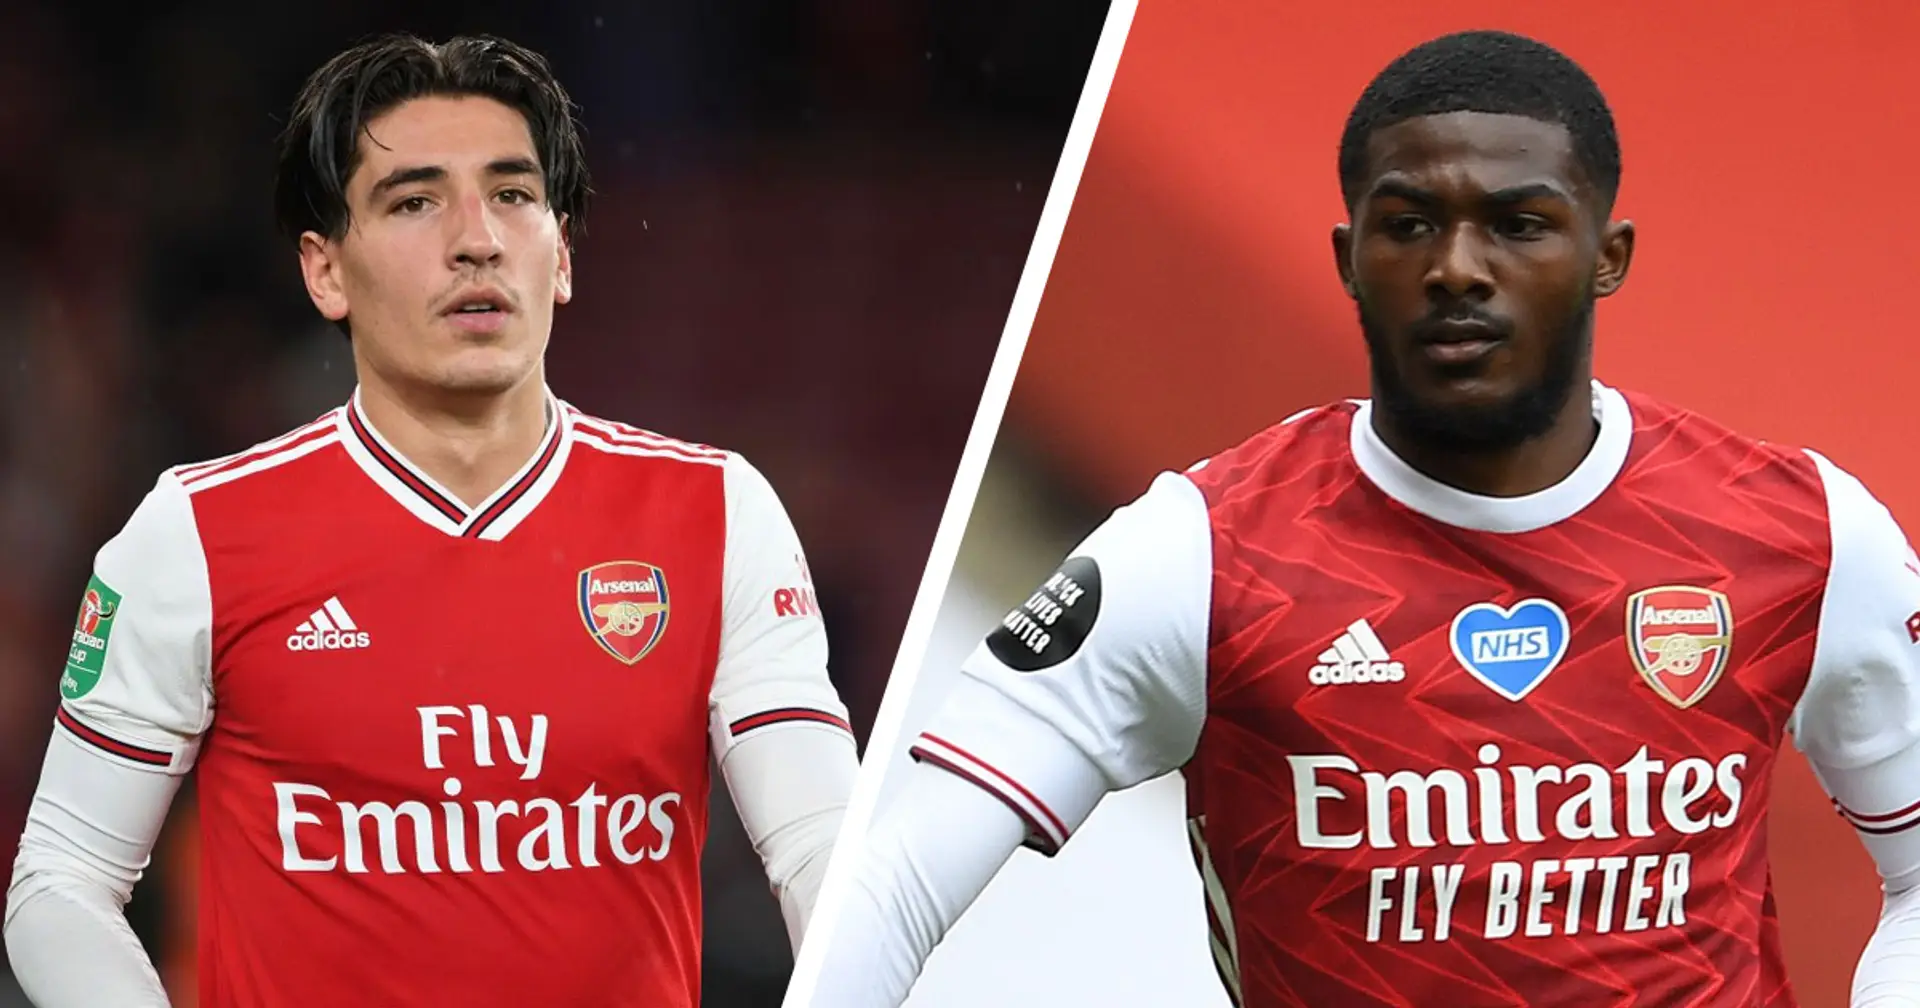 Bellerin vs Niles: analysing who comes out on top in right-back spot battle